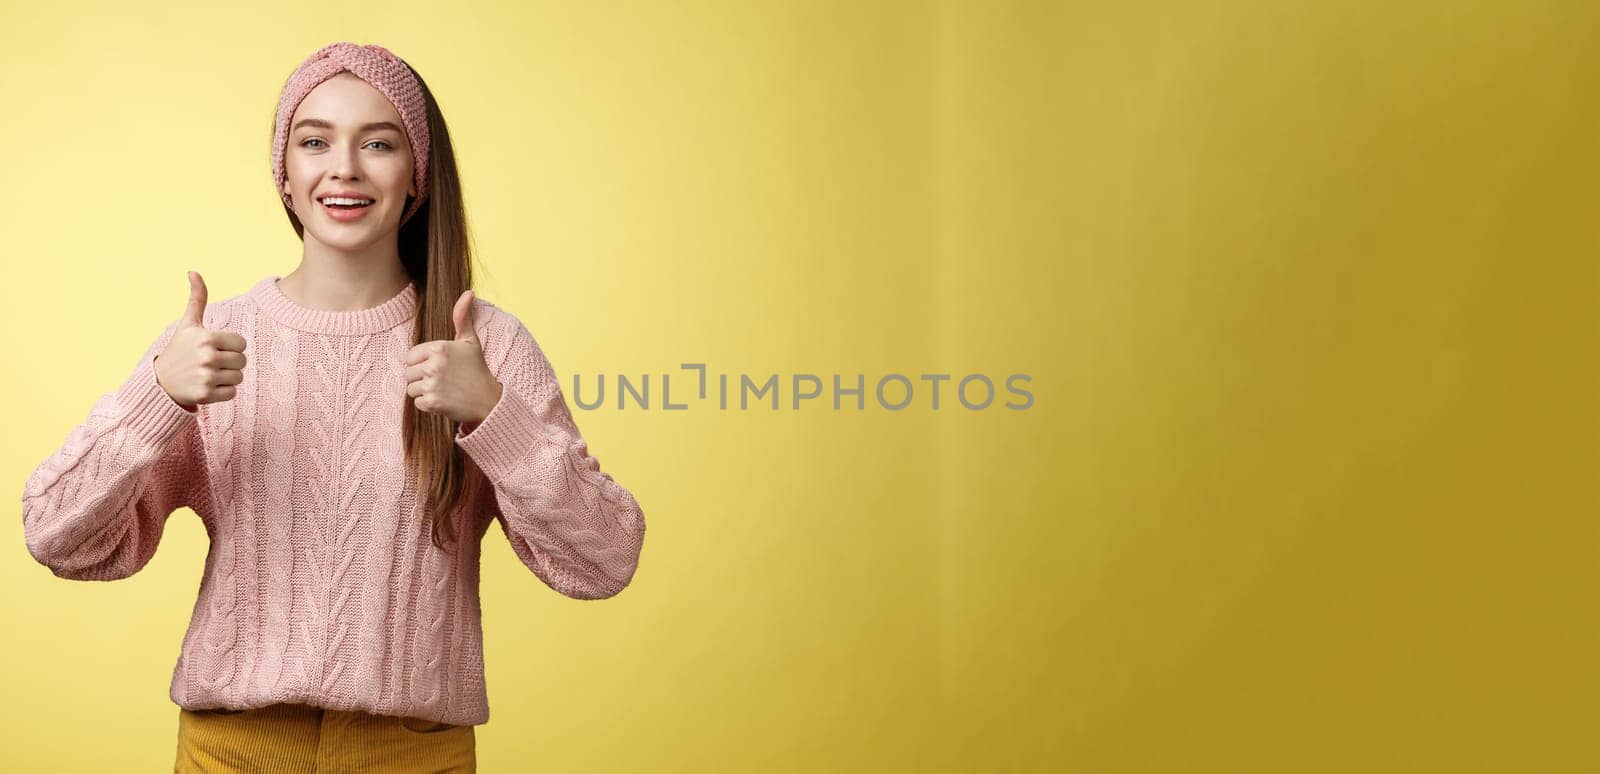 Attractive positive young girl in knitted sweater agree with suggestion, approving plan, showing thumbs up, recommending awesome film, smiling, cheering, supporting friend effort, encouraging.